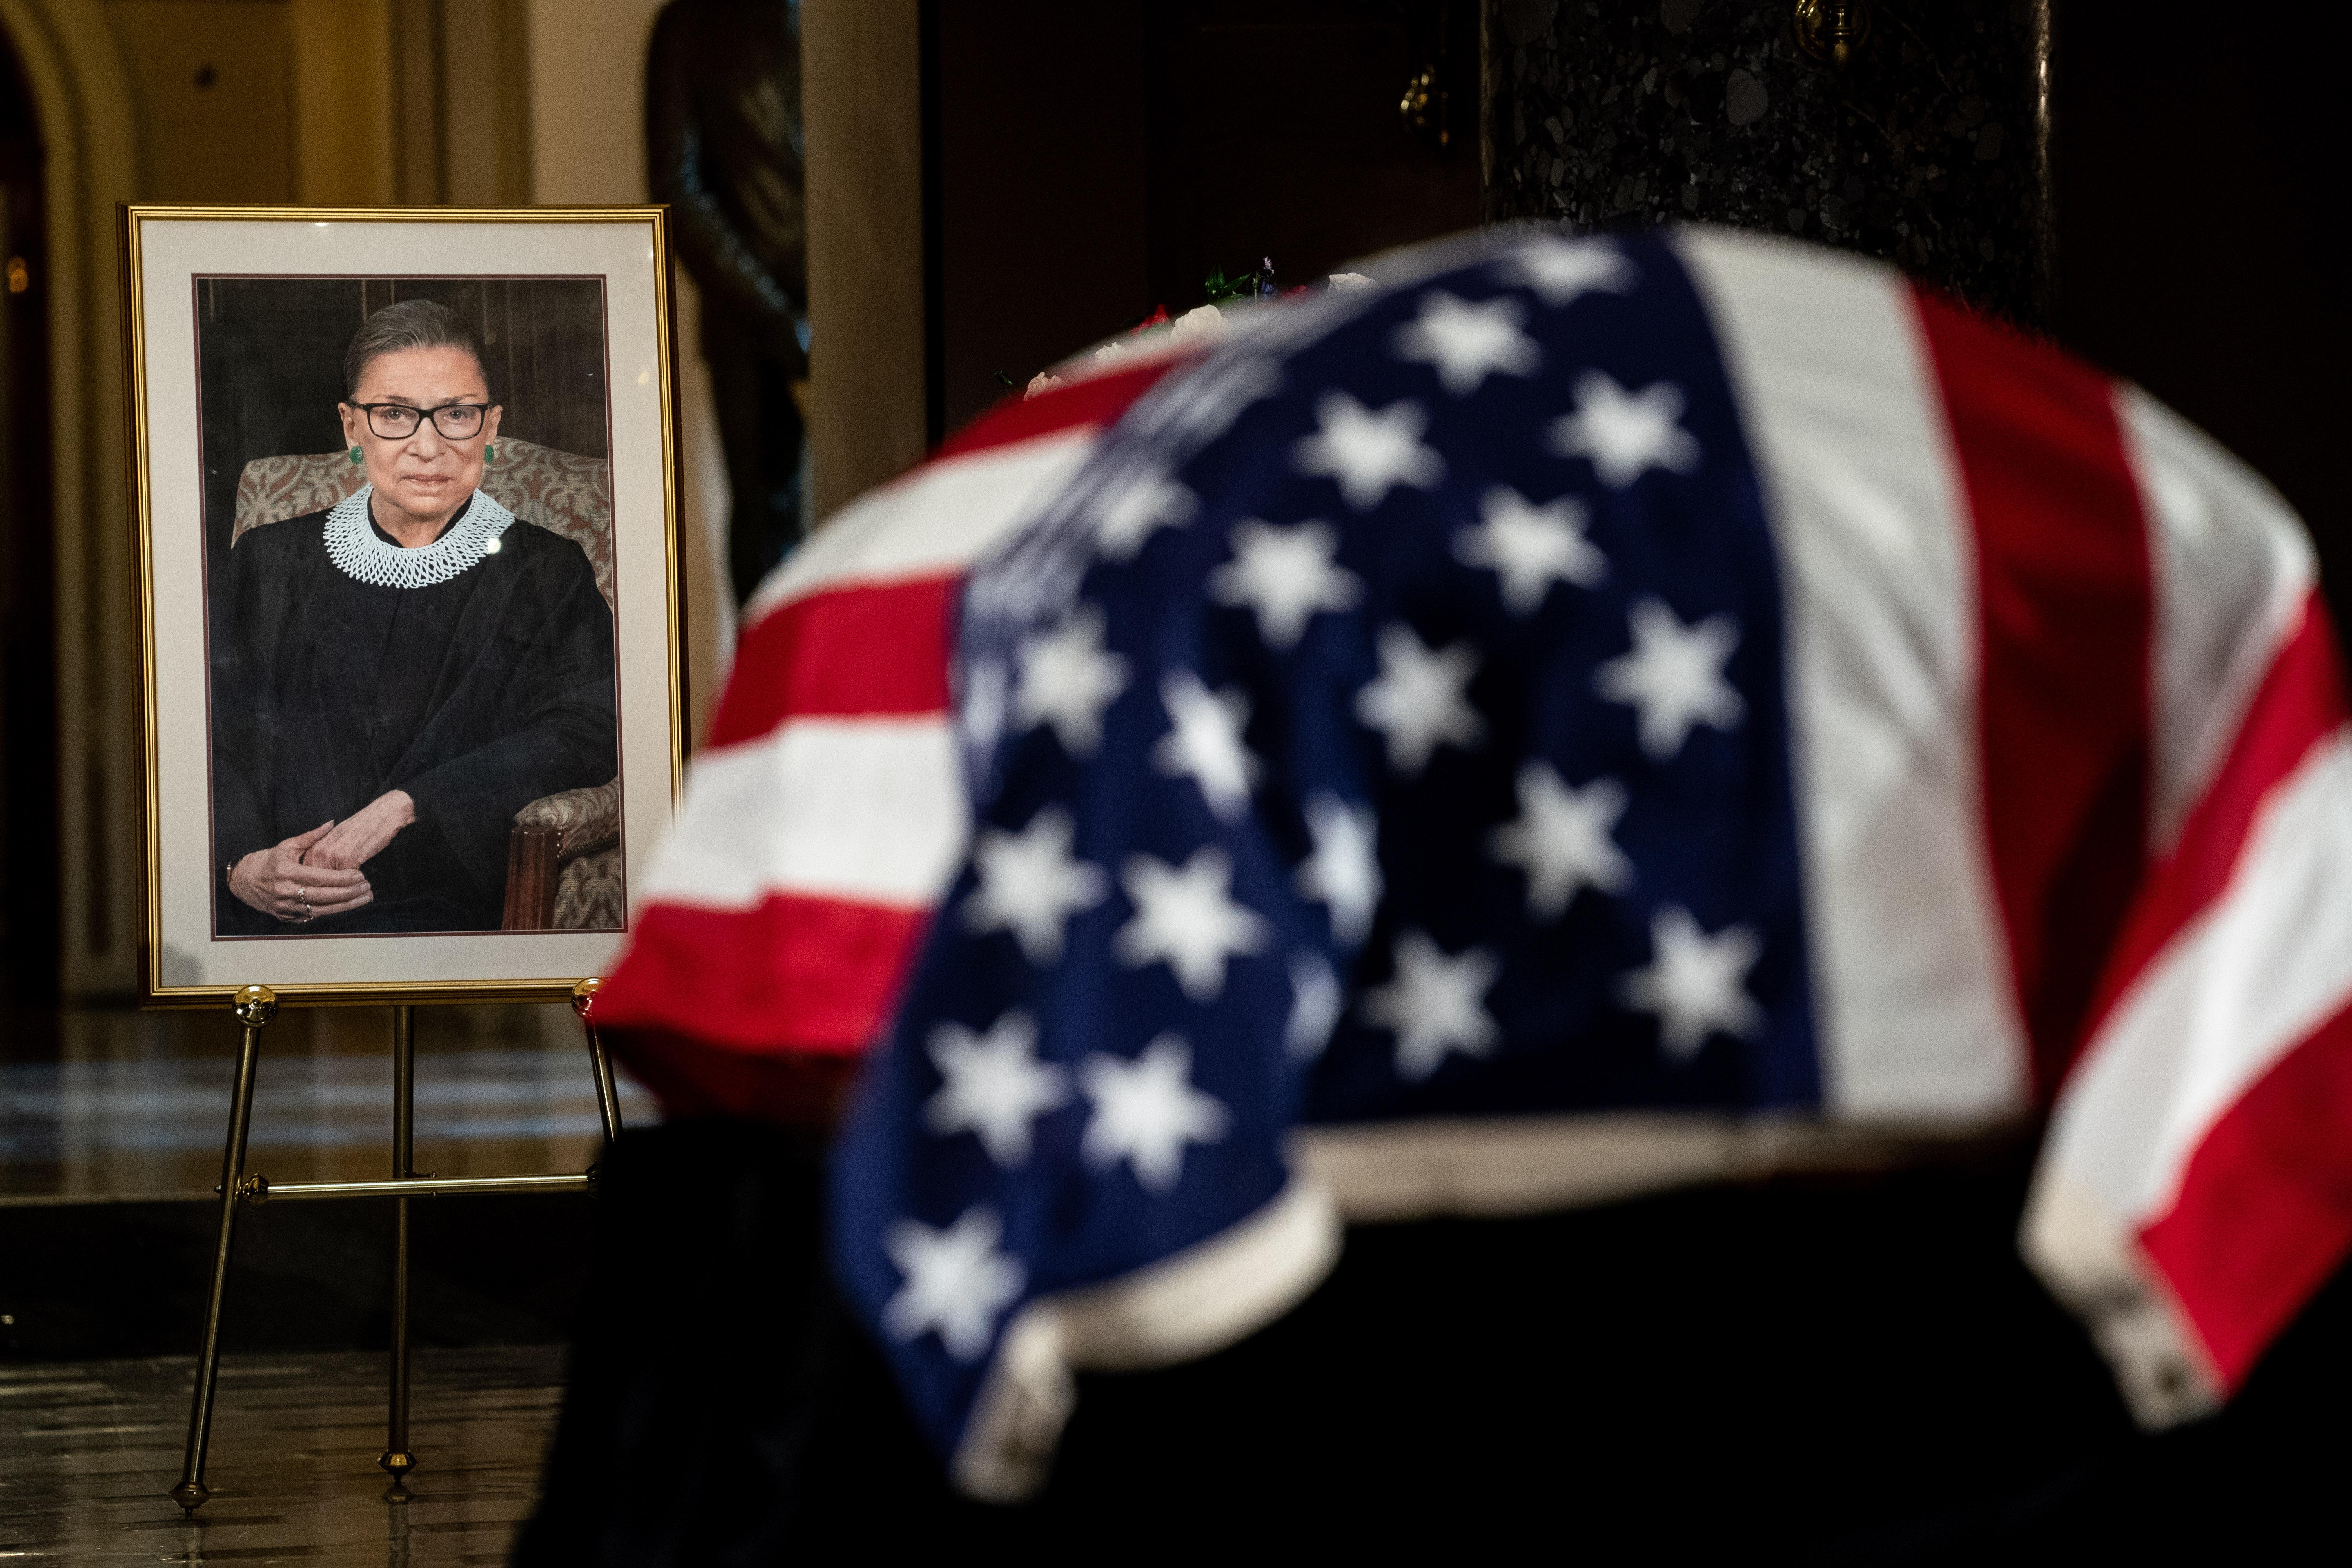 The flag-draped casket of RBG is seen near a framed portrait of her.